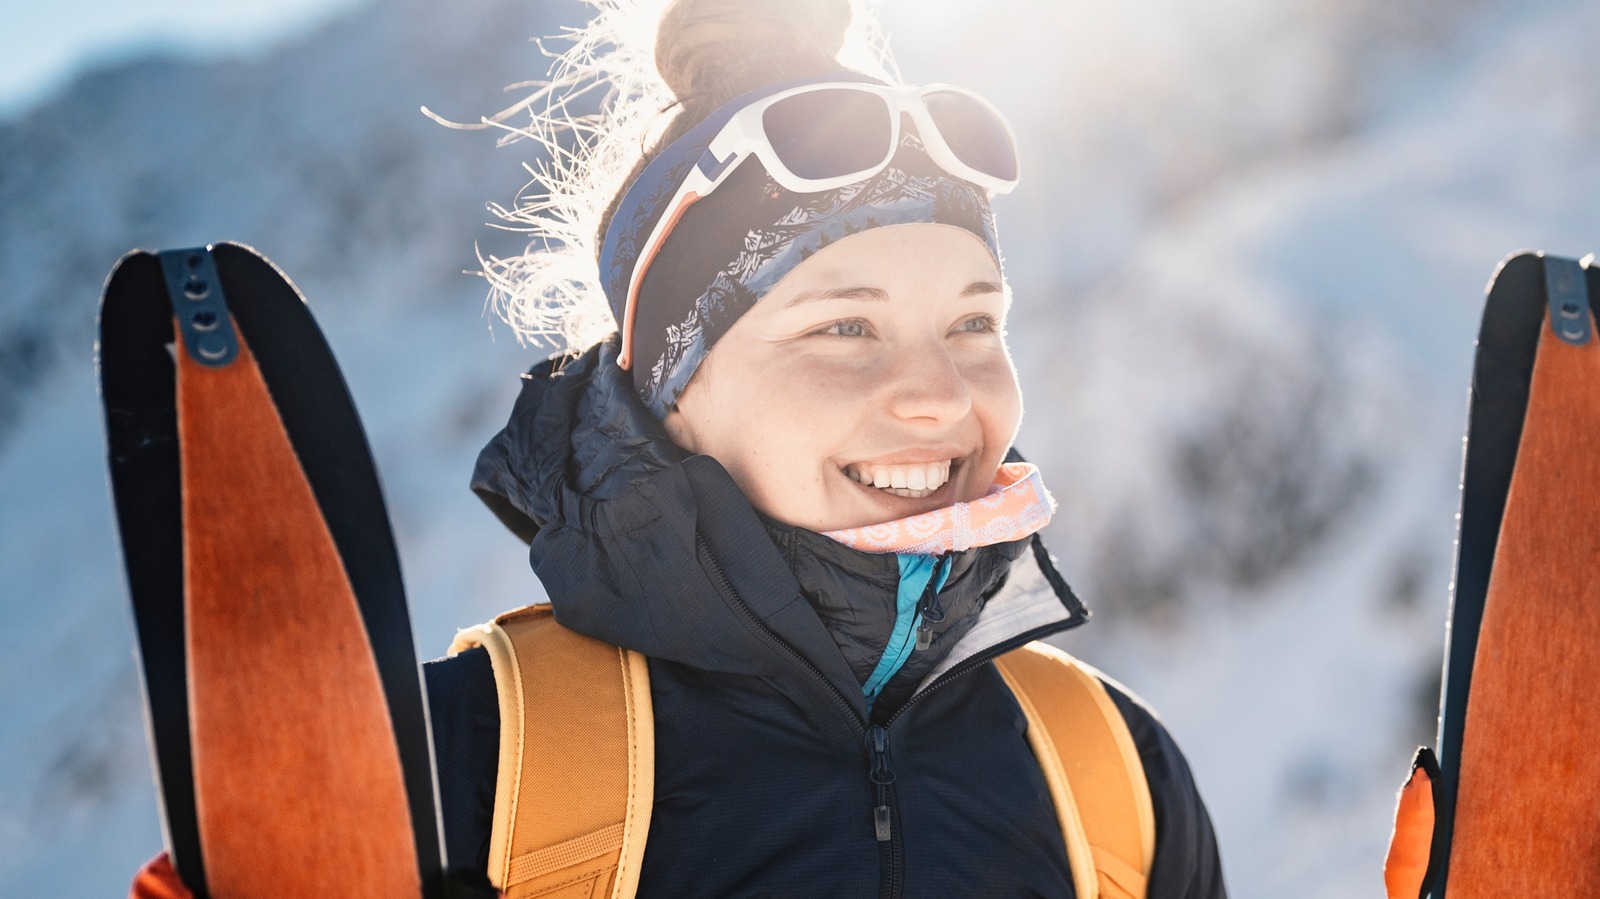 Sun protection while skiing - What helps against sunburn?